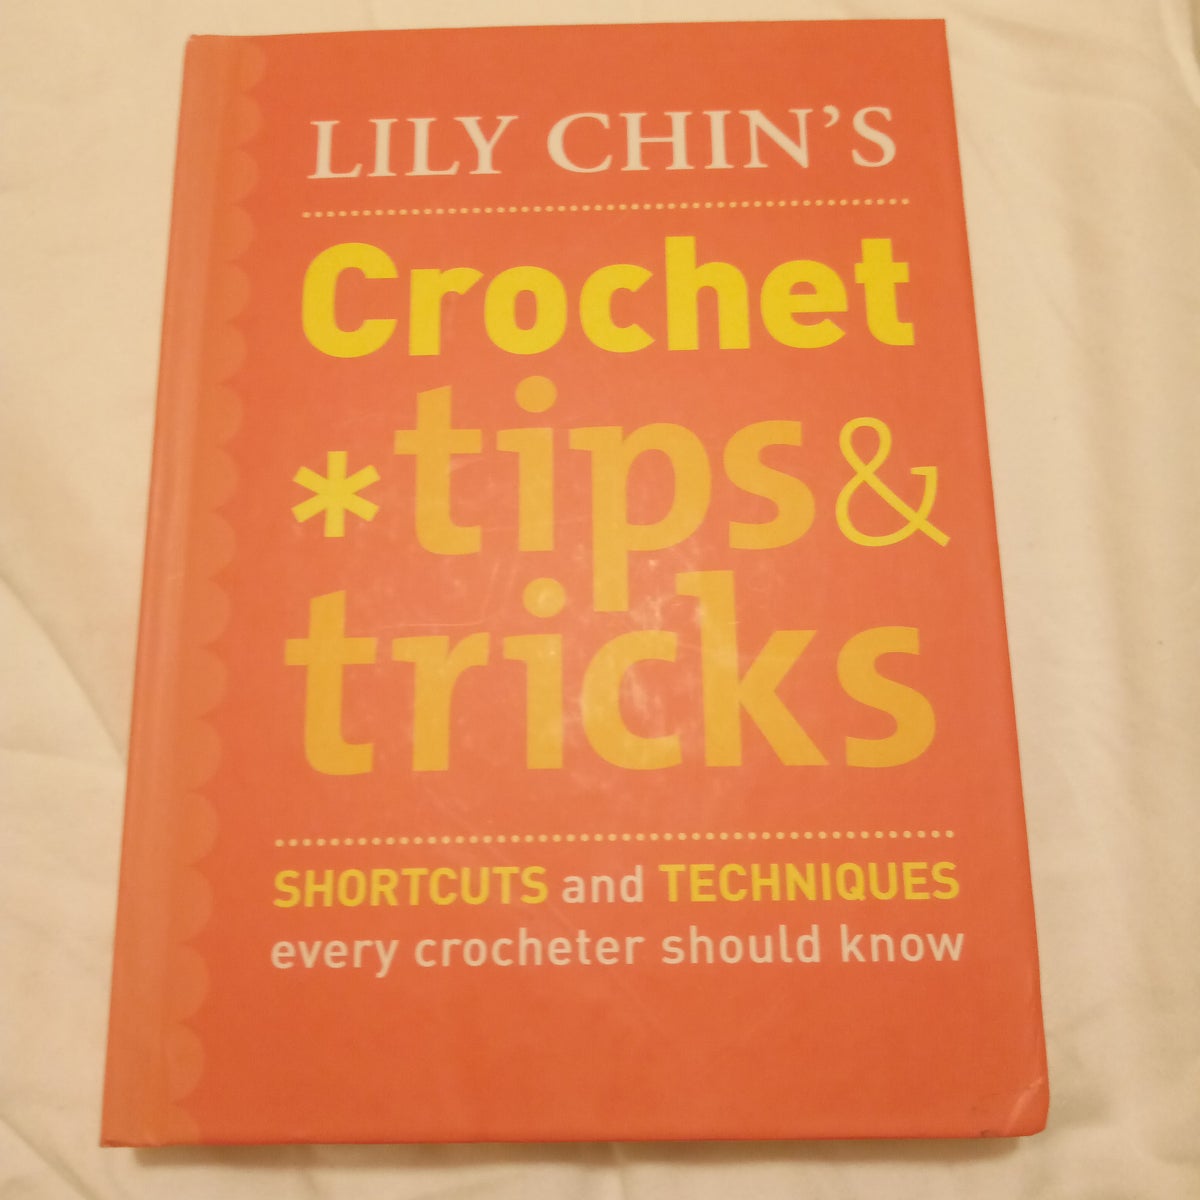 Crochet Patterns and Projects [Book]